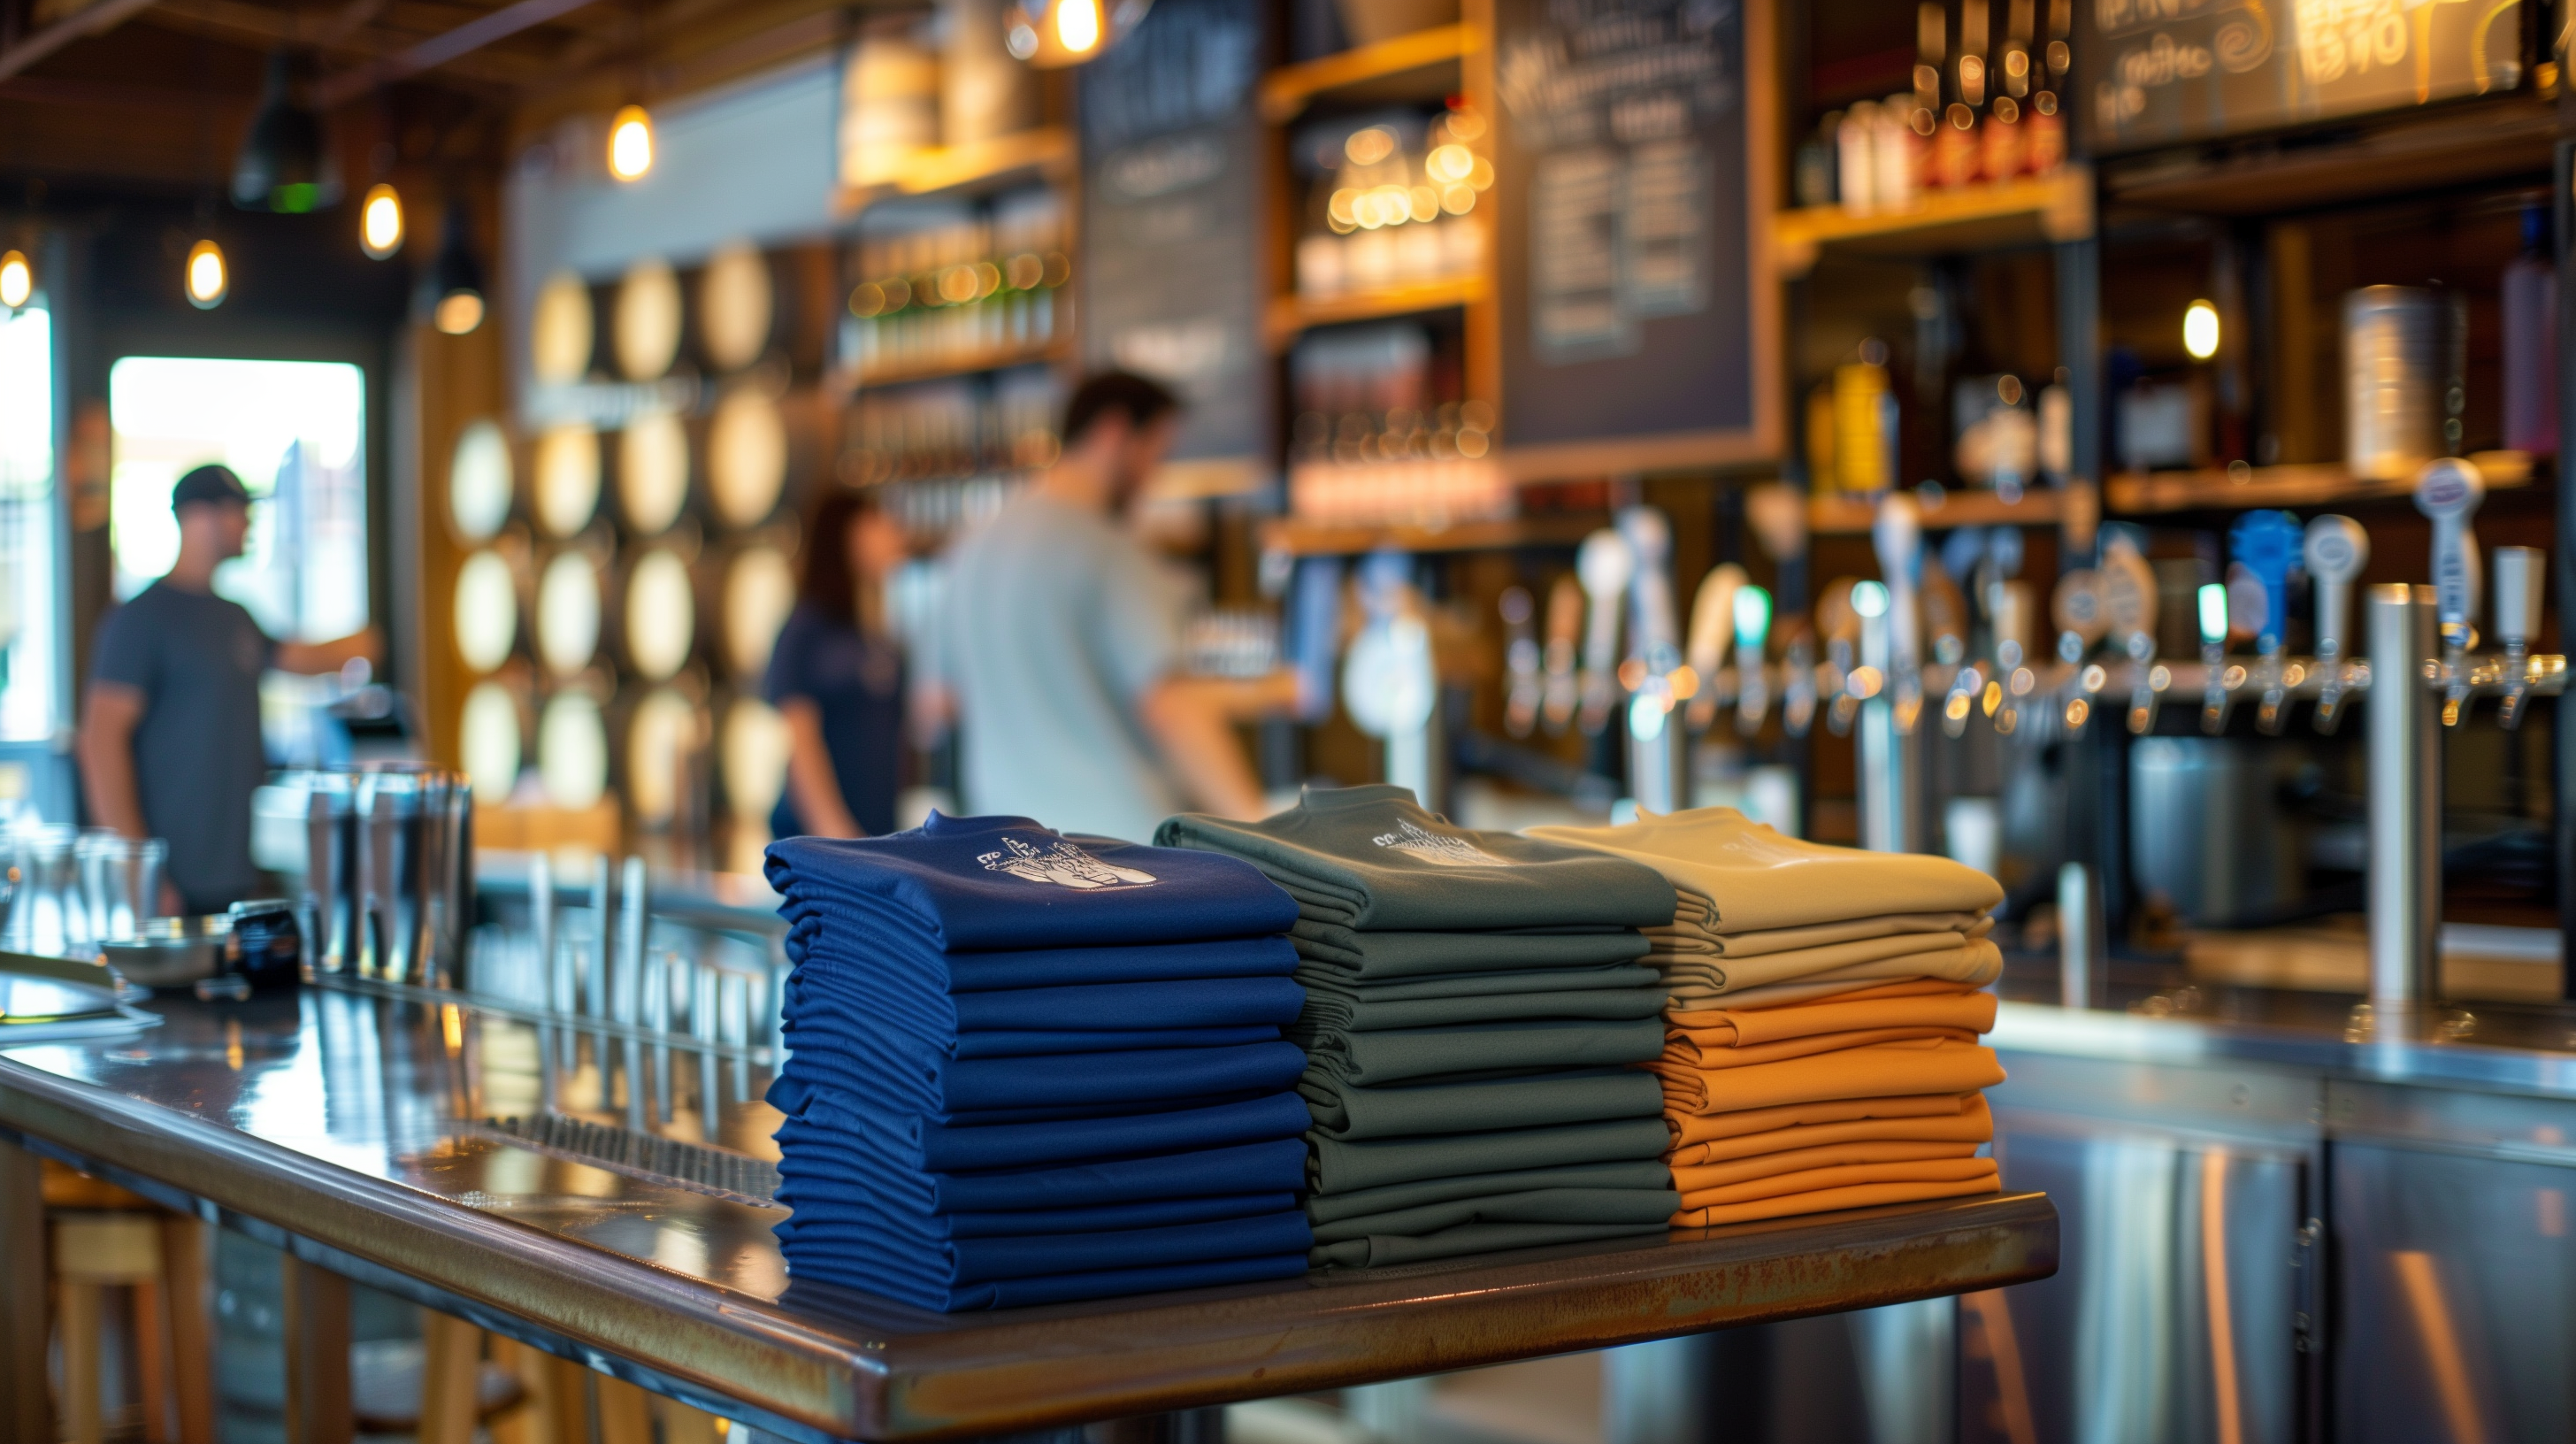 Merch from your favorite breweries, taprooms, and bottle shops